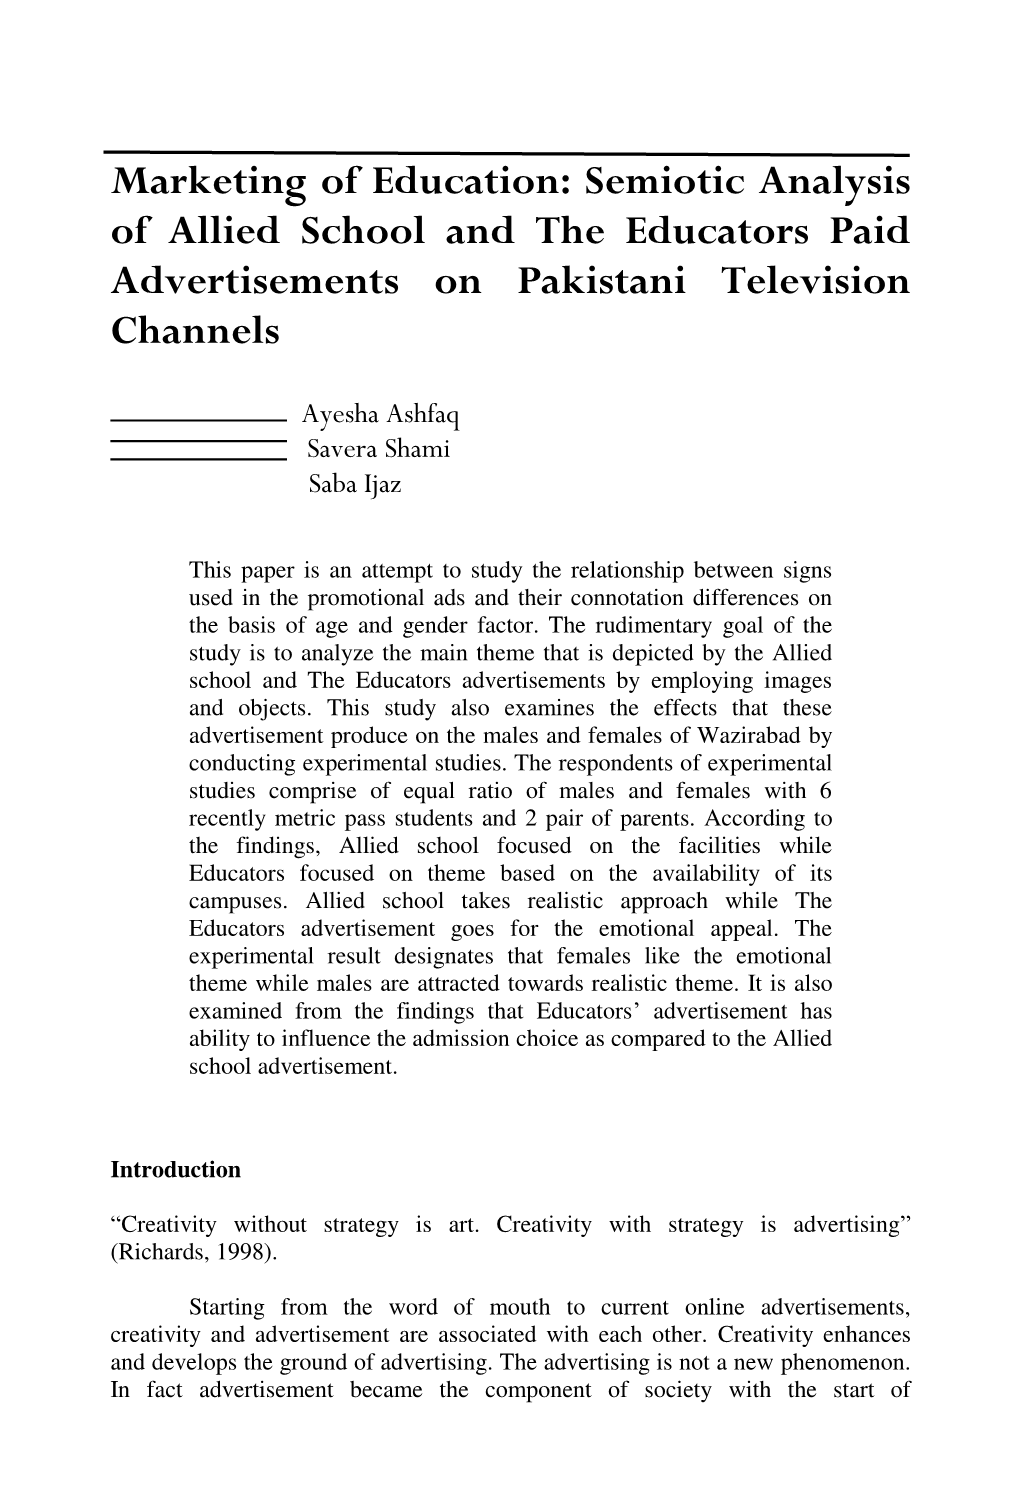 Marketing of Education: Semiotic Analysis of Allied School and the Educators Paid Advertisements on Pakistani Television Channels